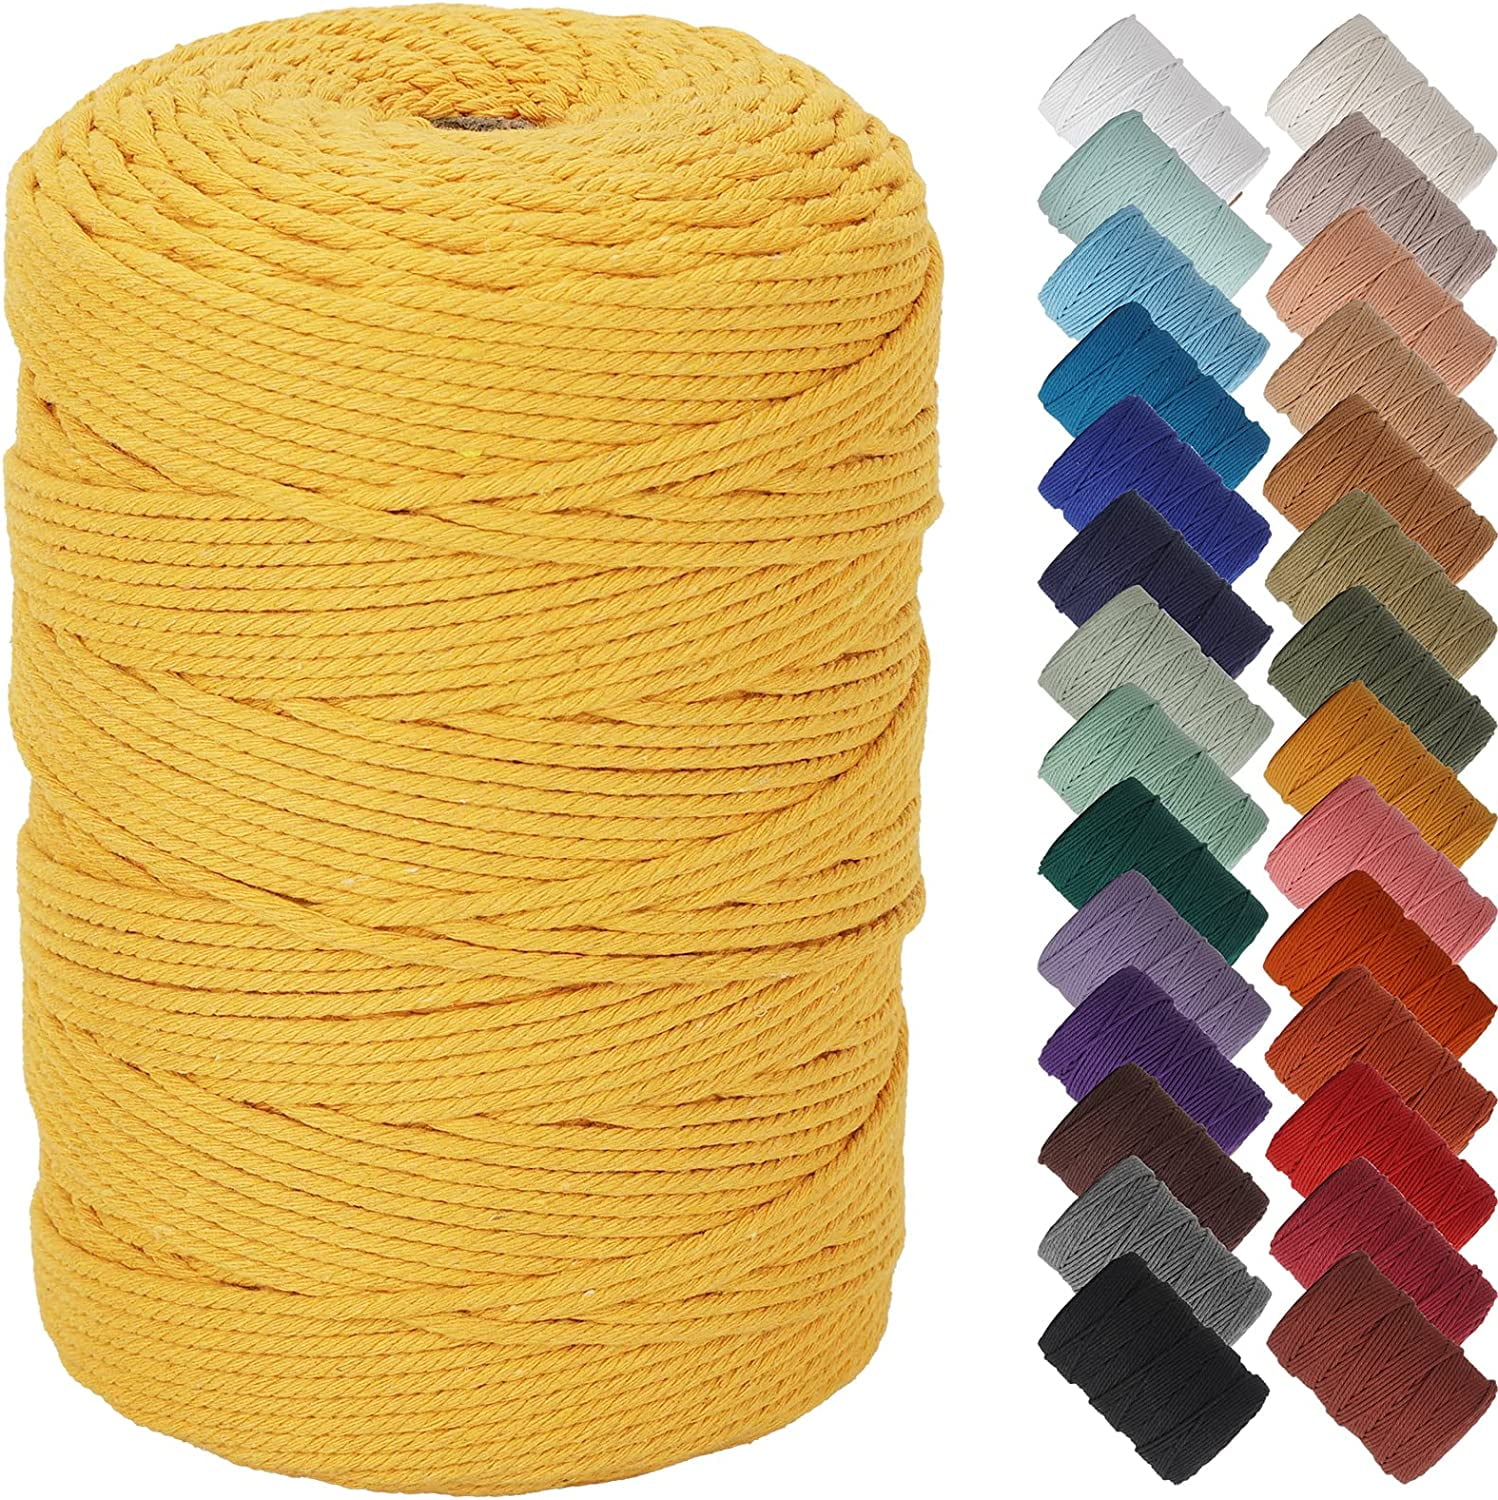 3mm x 328 Yards Cotton Macrame Rope 3 Strand Twisted Cotton Cord Macrame Cord 